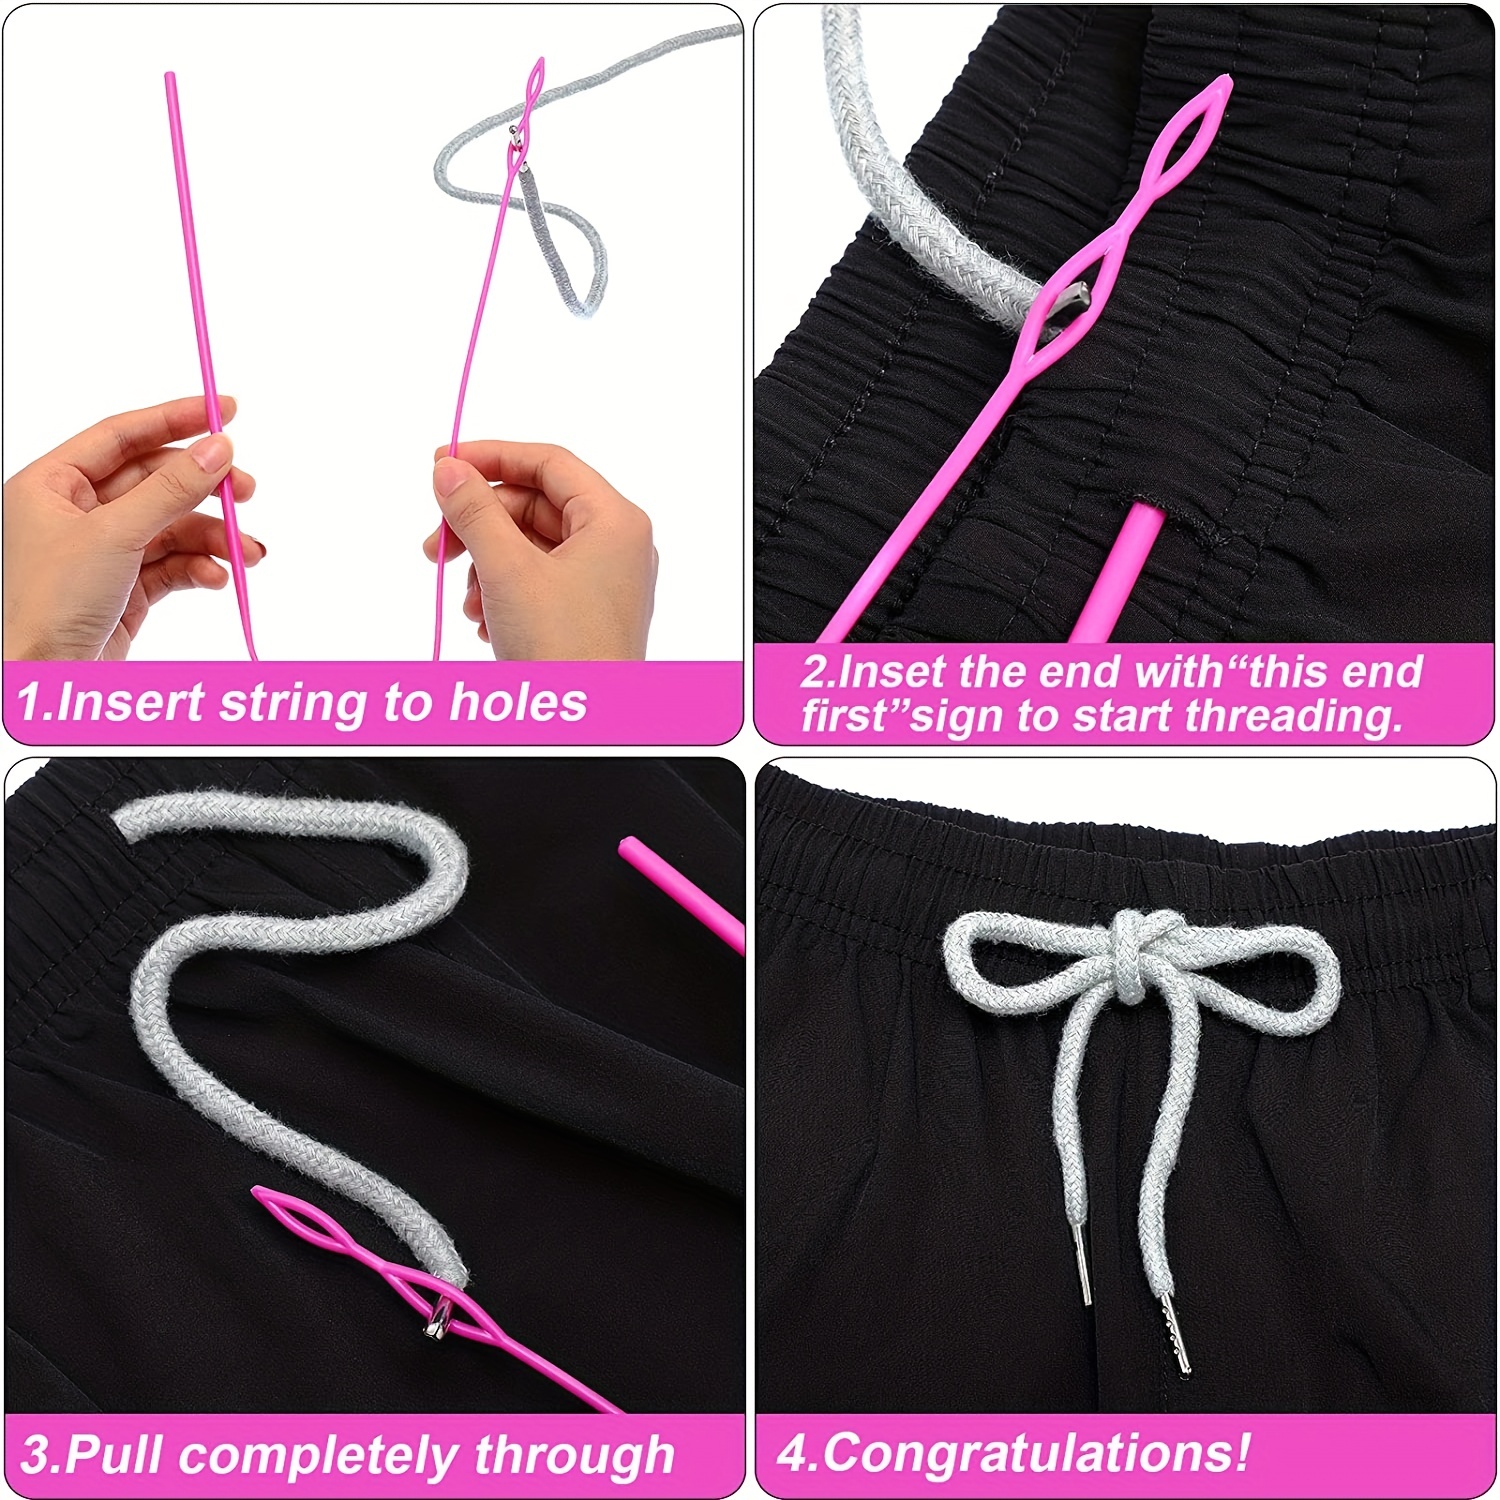 16 Pieces Replacement Drawstrings, Hoodie String Replacement with 3 Pieces Drawstring Threader Tool, Drawcord Replacement for Sweatpants Shorts